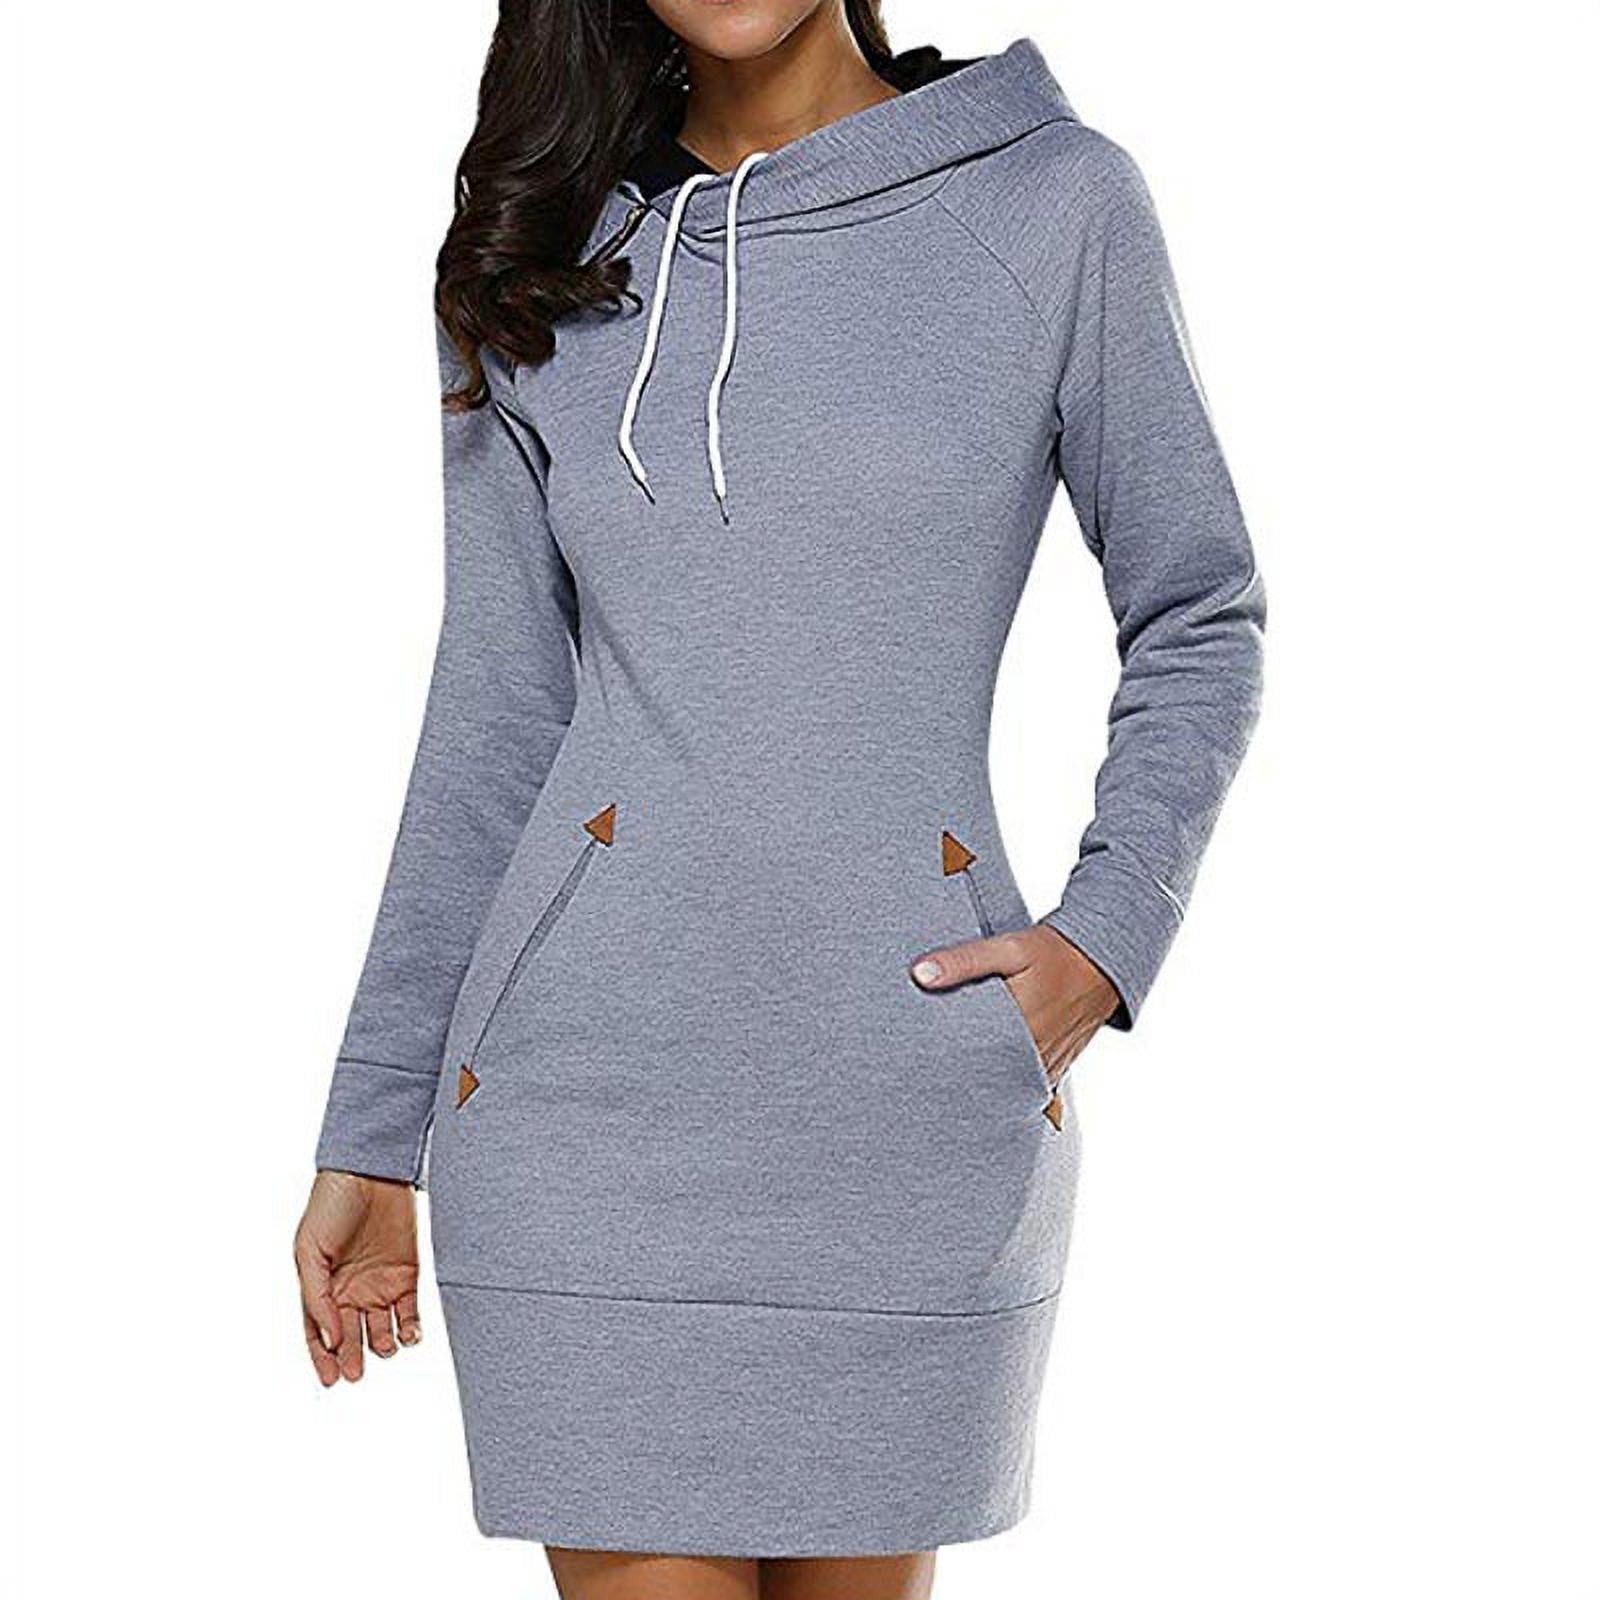 Womens Long Sleeve Hooded Anything Once Loose Casual Pullover Hoodie Dress Tunic Sweatshirt Dress with Pockets